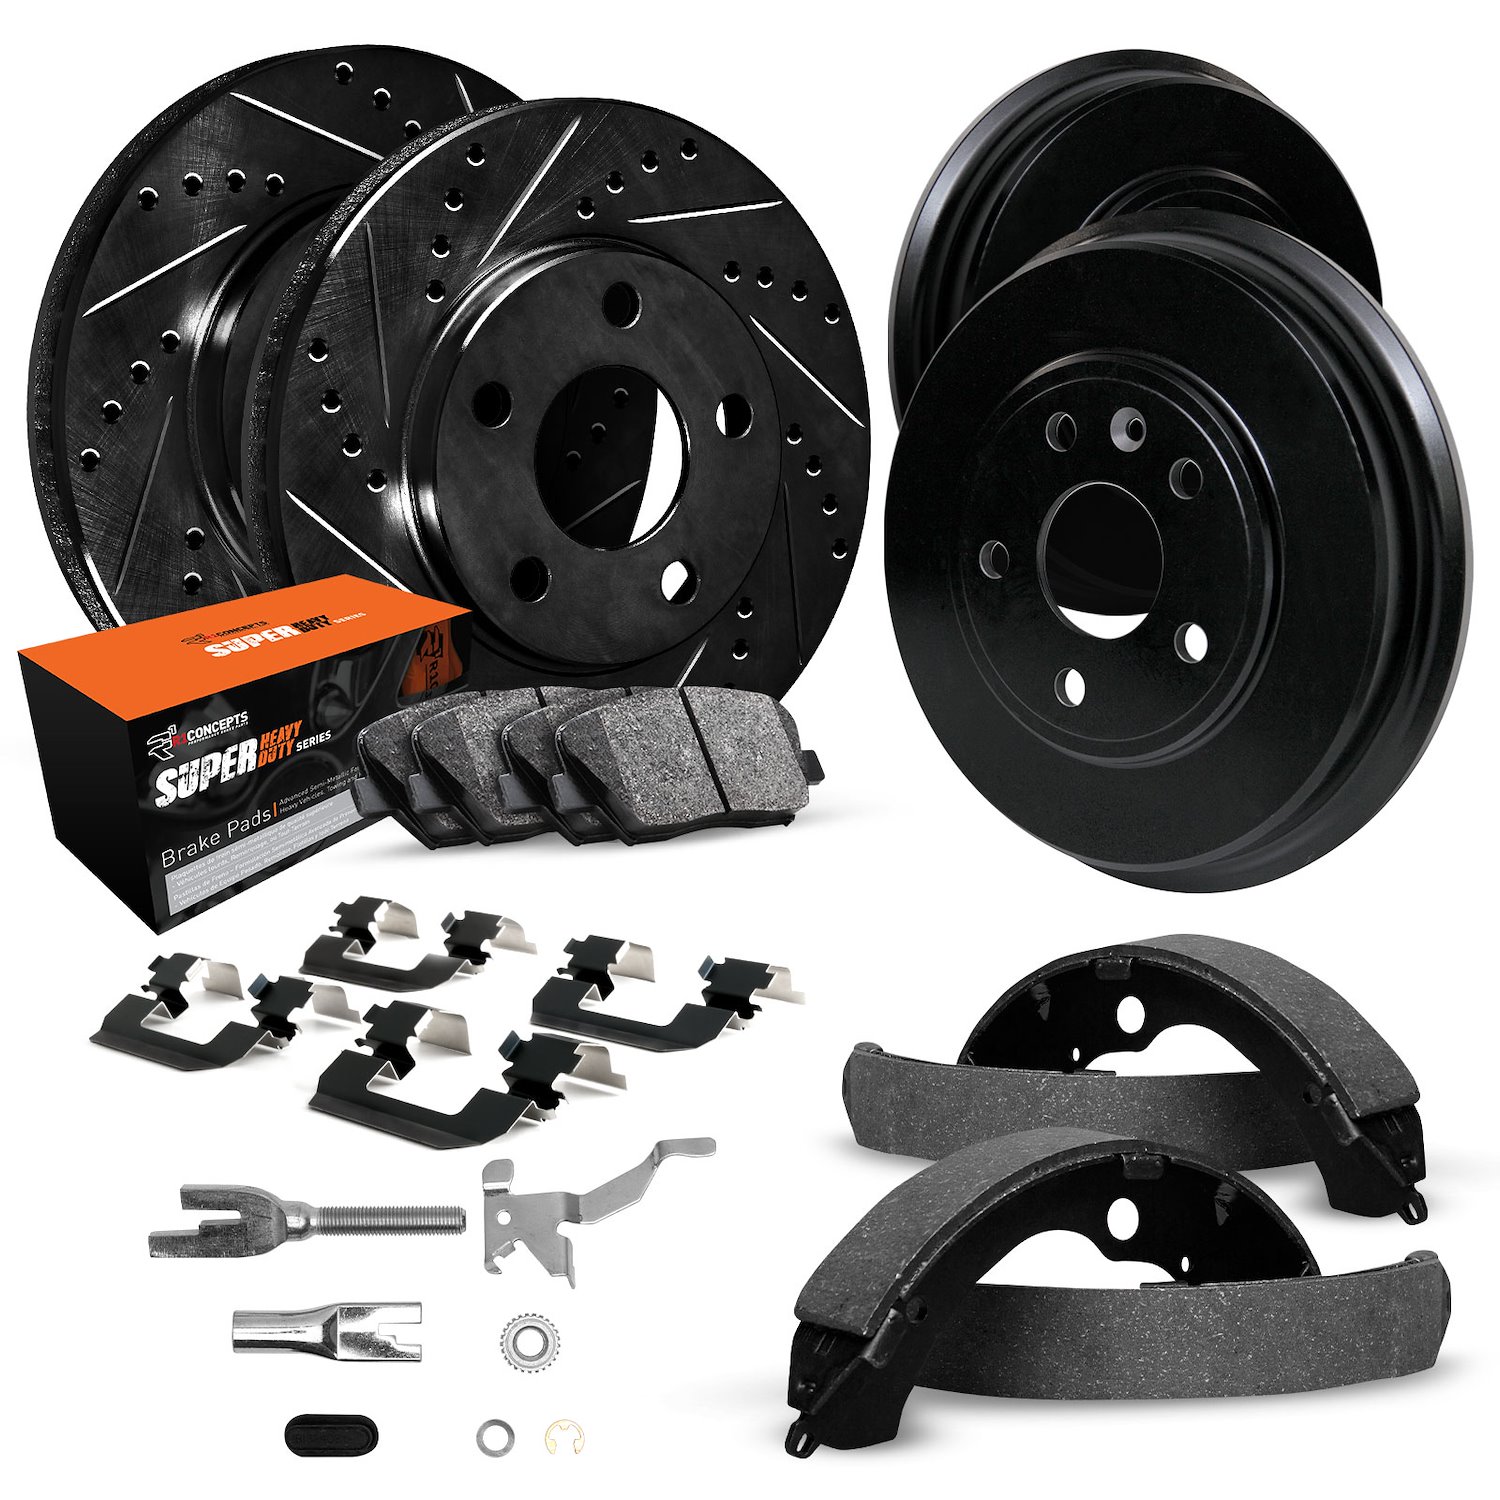 E-Line Drilled/Slotted Black Rotor & Drum Set w/Super-Duty Pads, Shoes, Hardware/Adjusters, 1983-1989 Ford/Lincoln/Mercury/Mazda